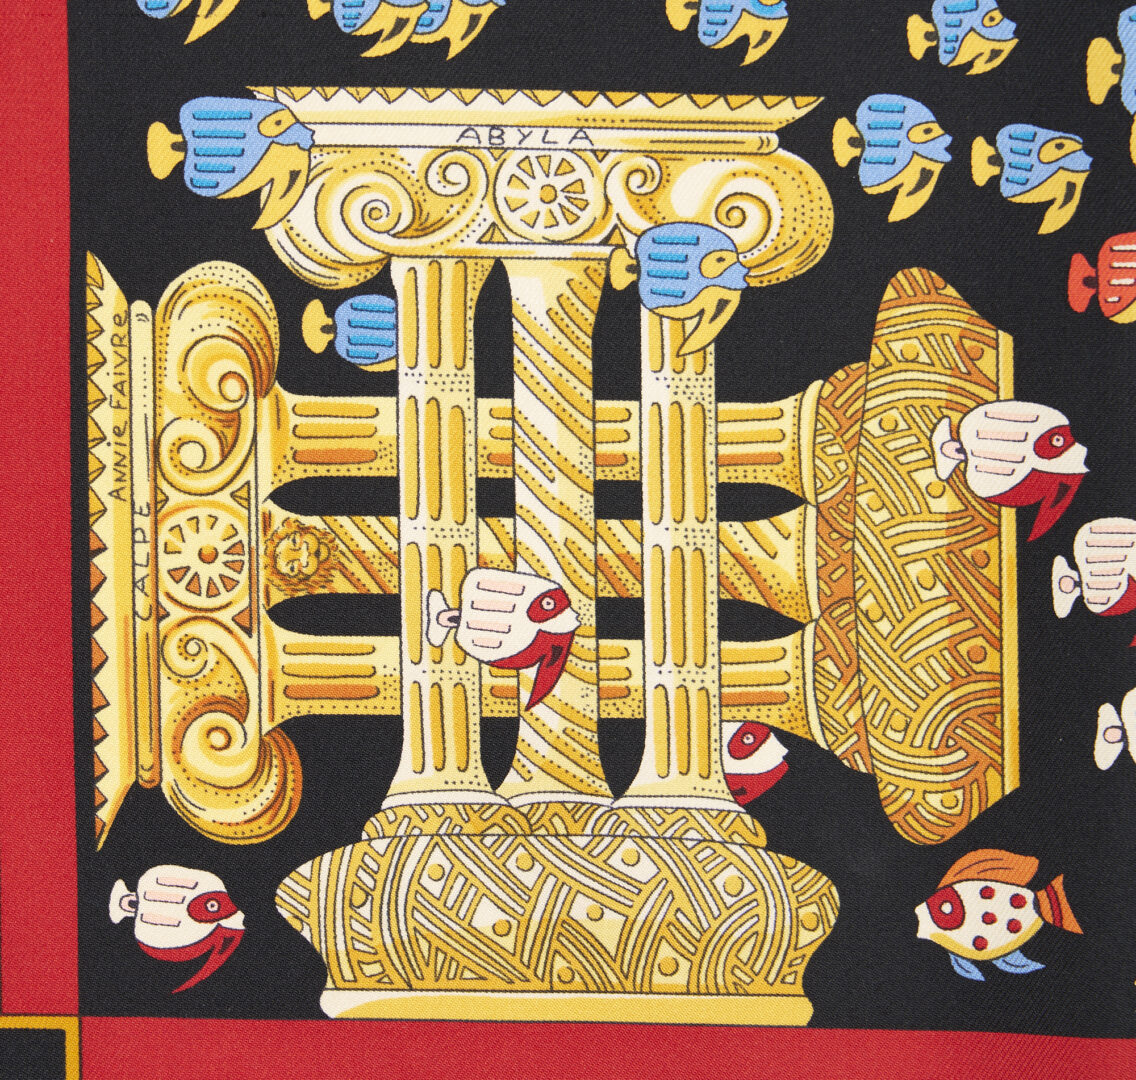 Lot 618: 2 Hermes Silk Scarves, incl. Under the Waves Pattern, w/ Boxes